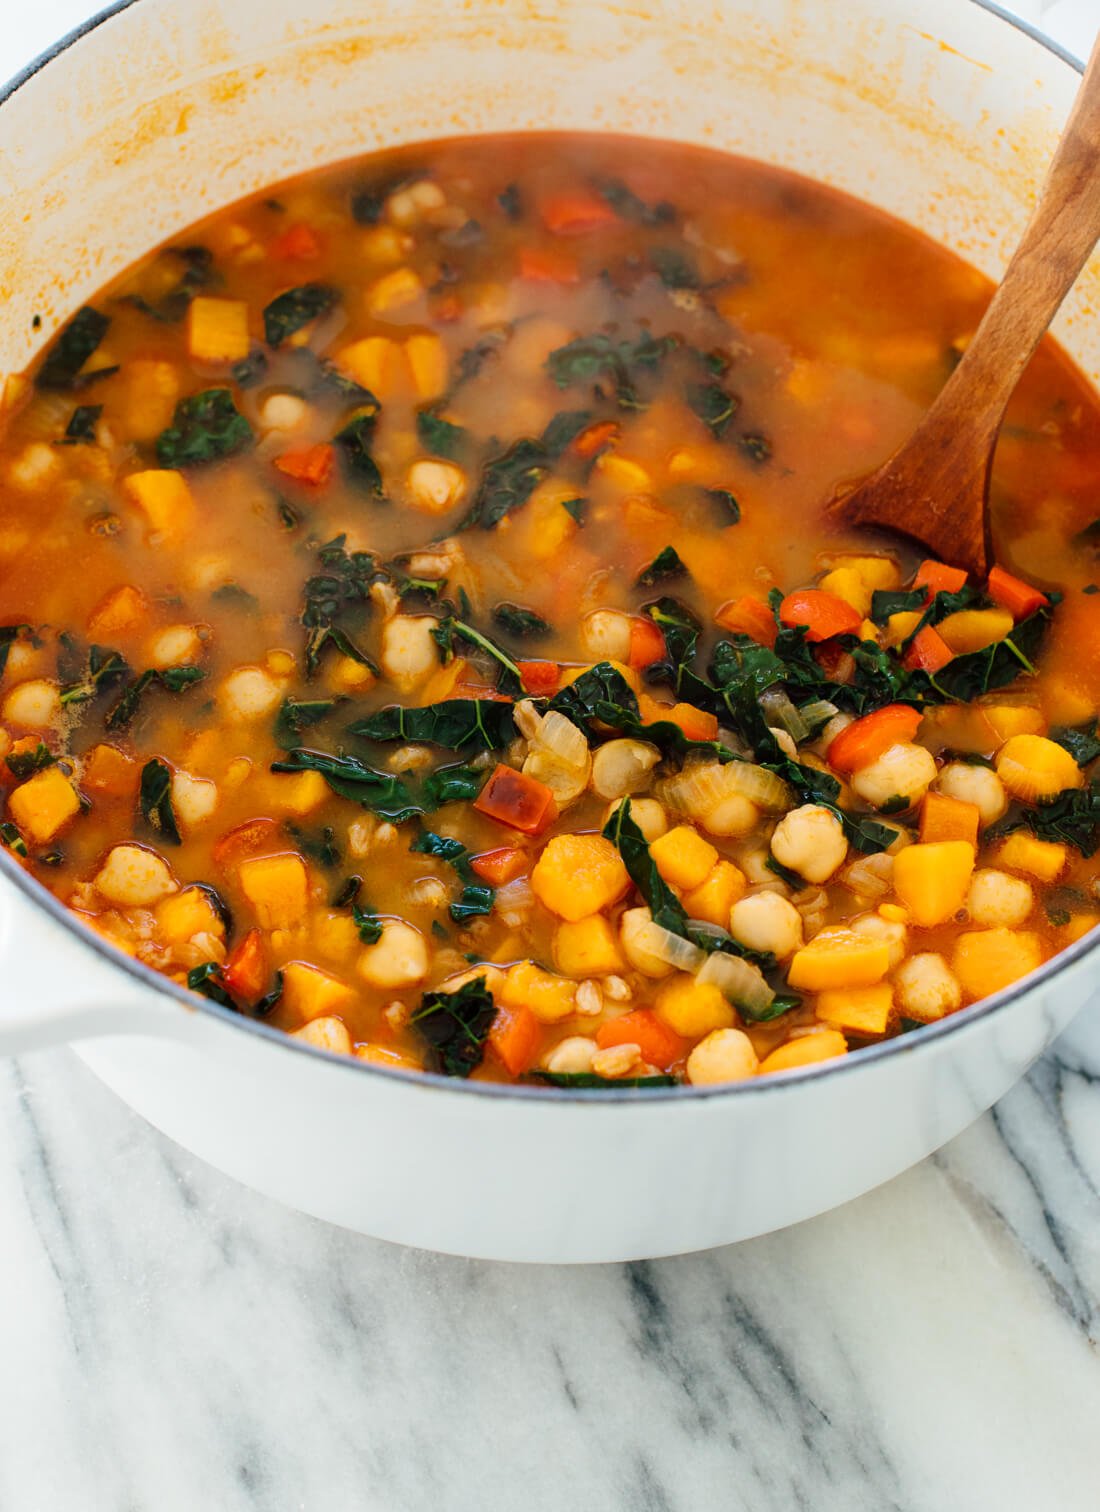 Warm up with this hearty sweet potato, kale and chickpea soup!